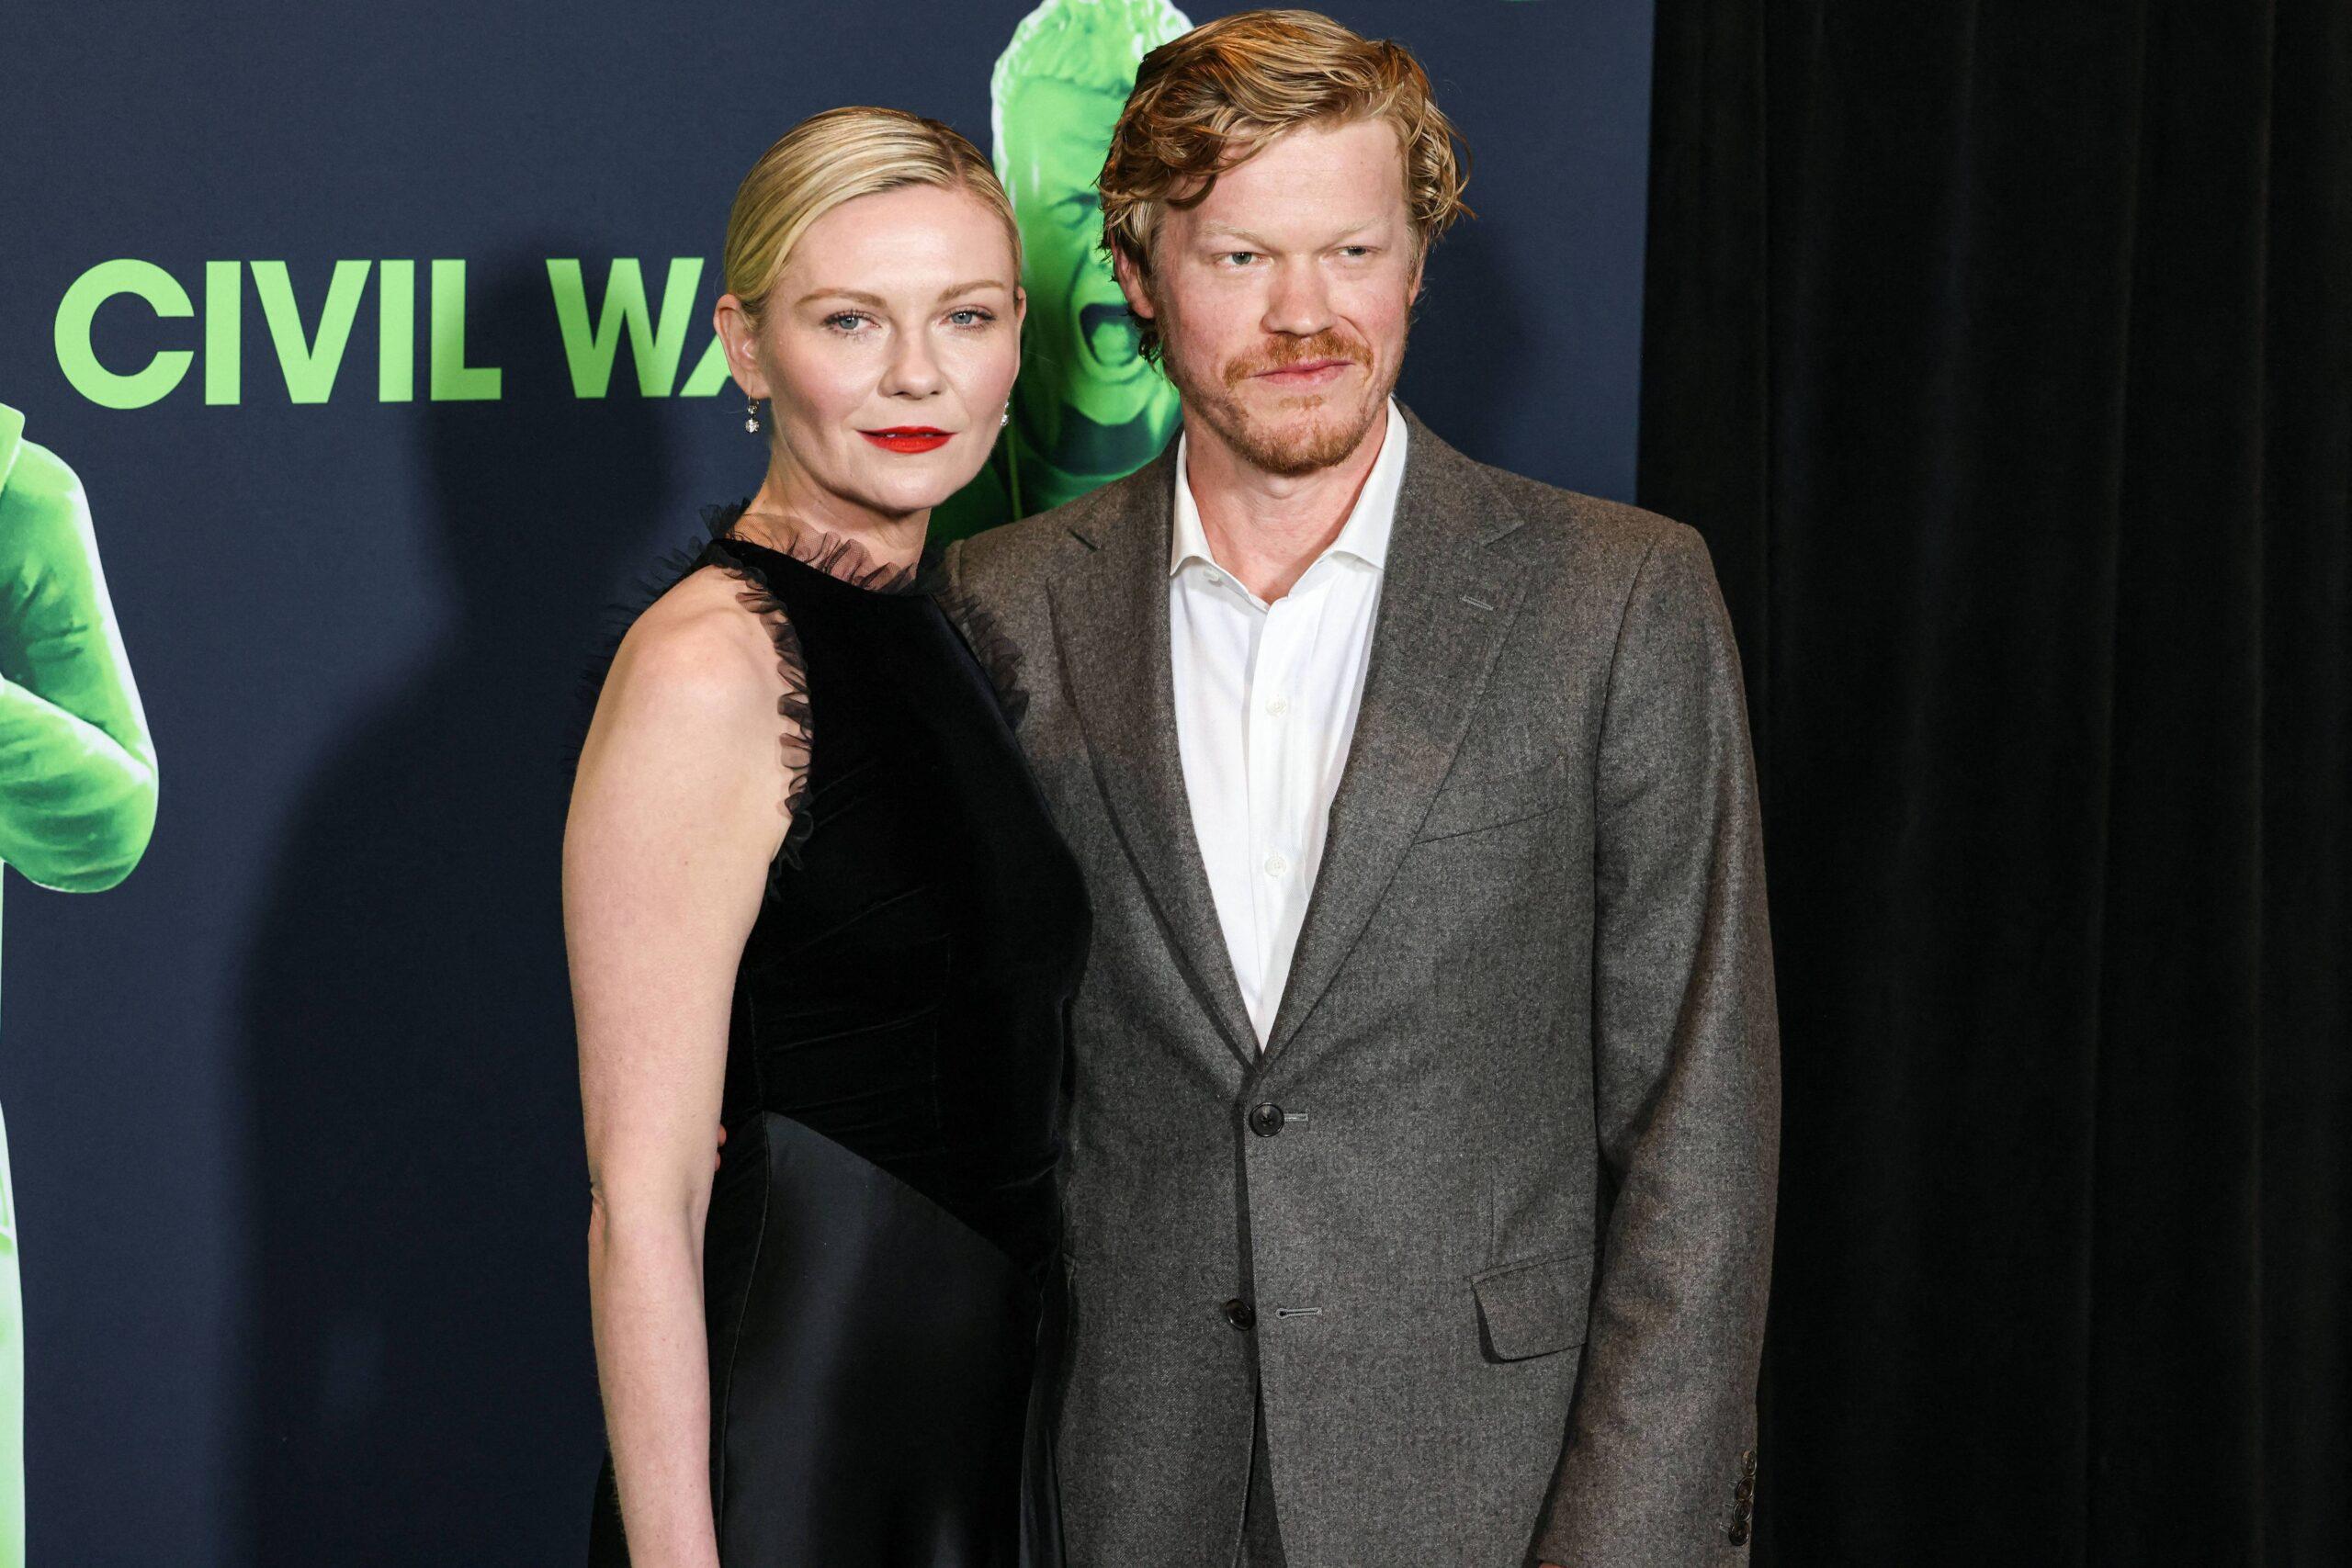 Kirsten Dunst and Jesse Plemons at Los Angeles Special Screening Of A24's 'Civil War'